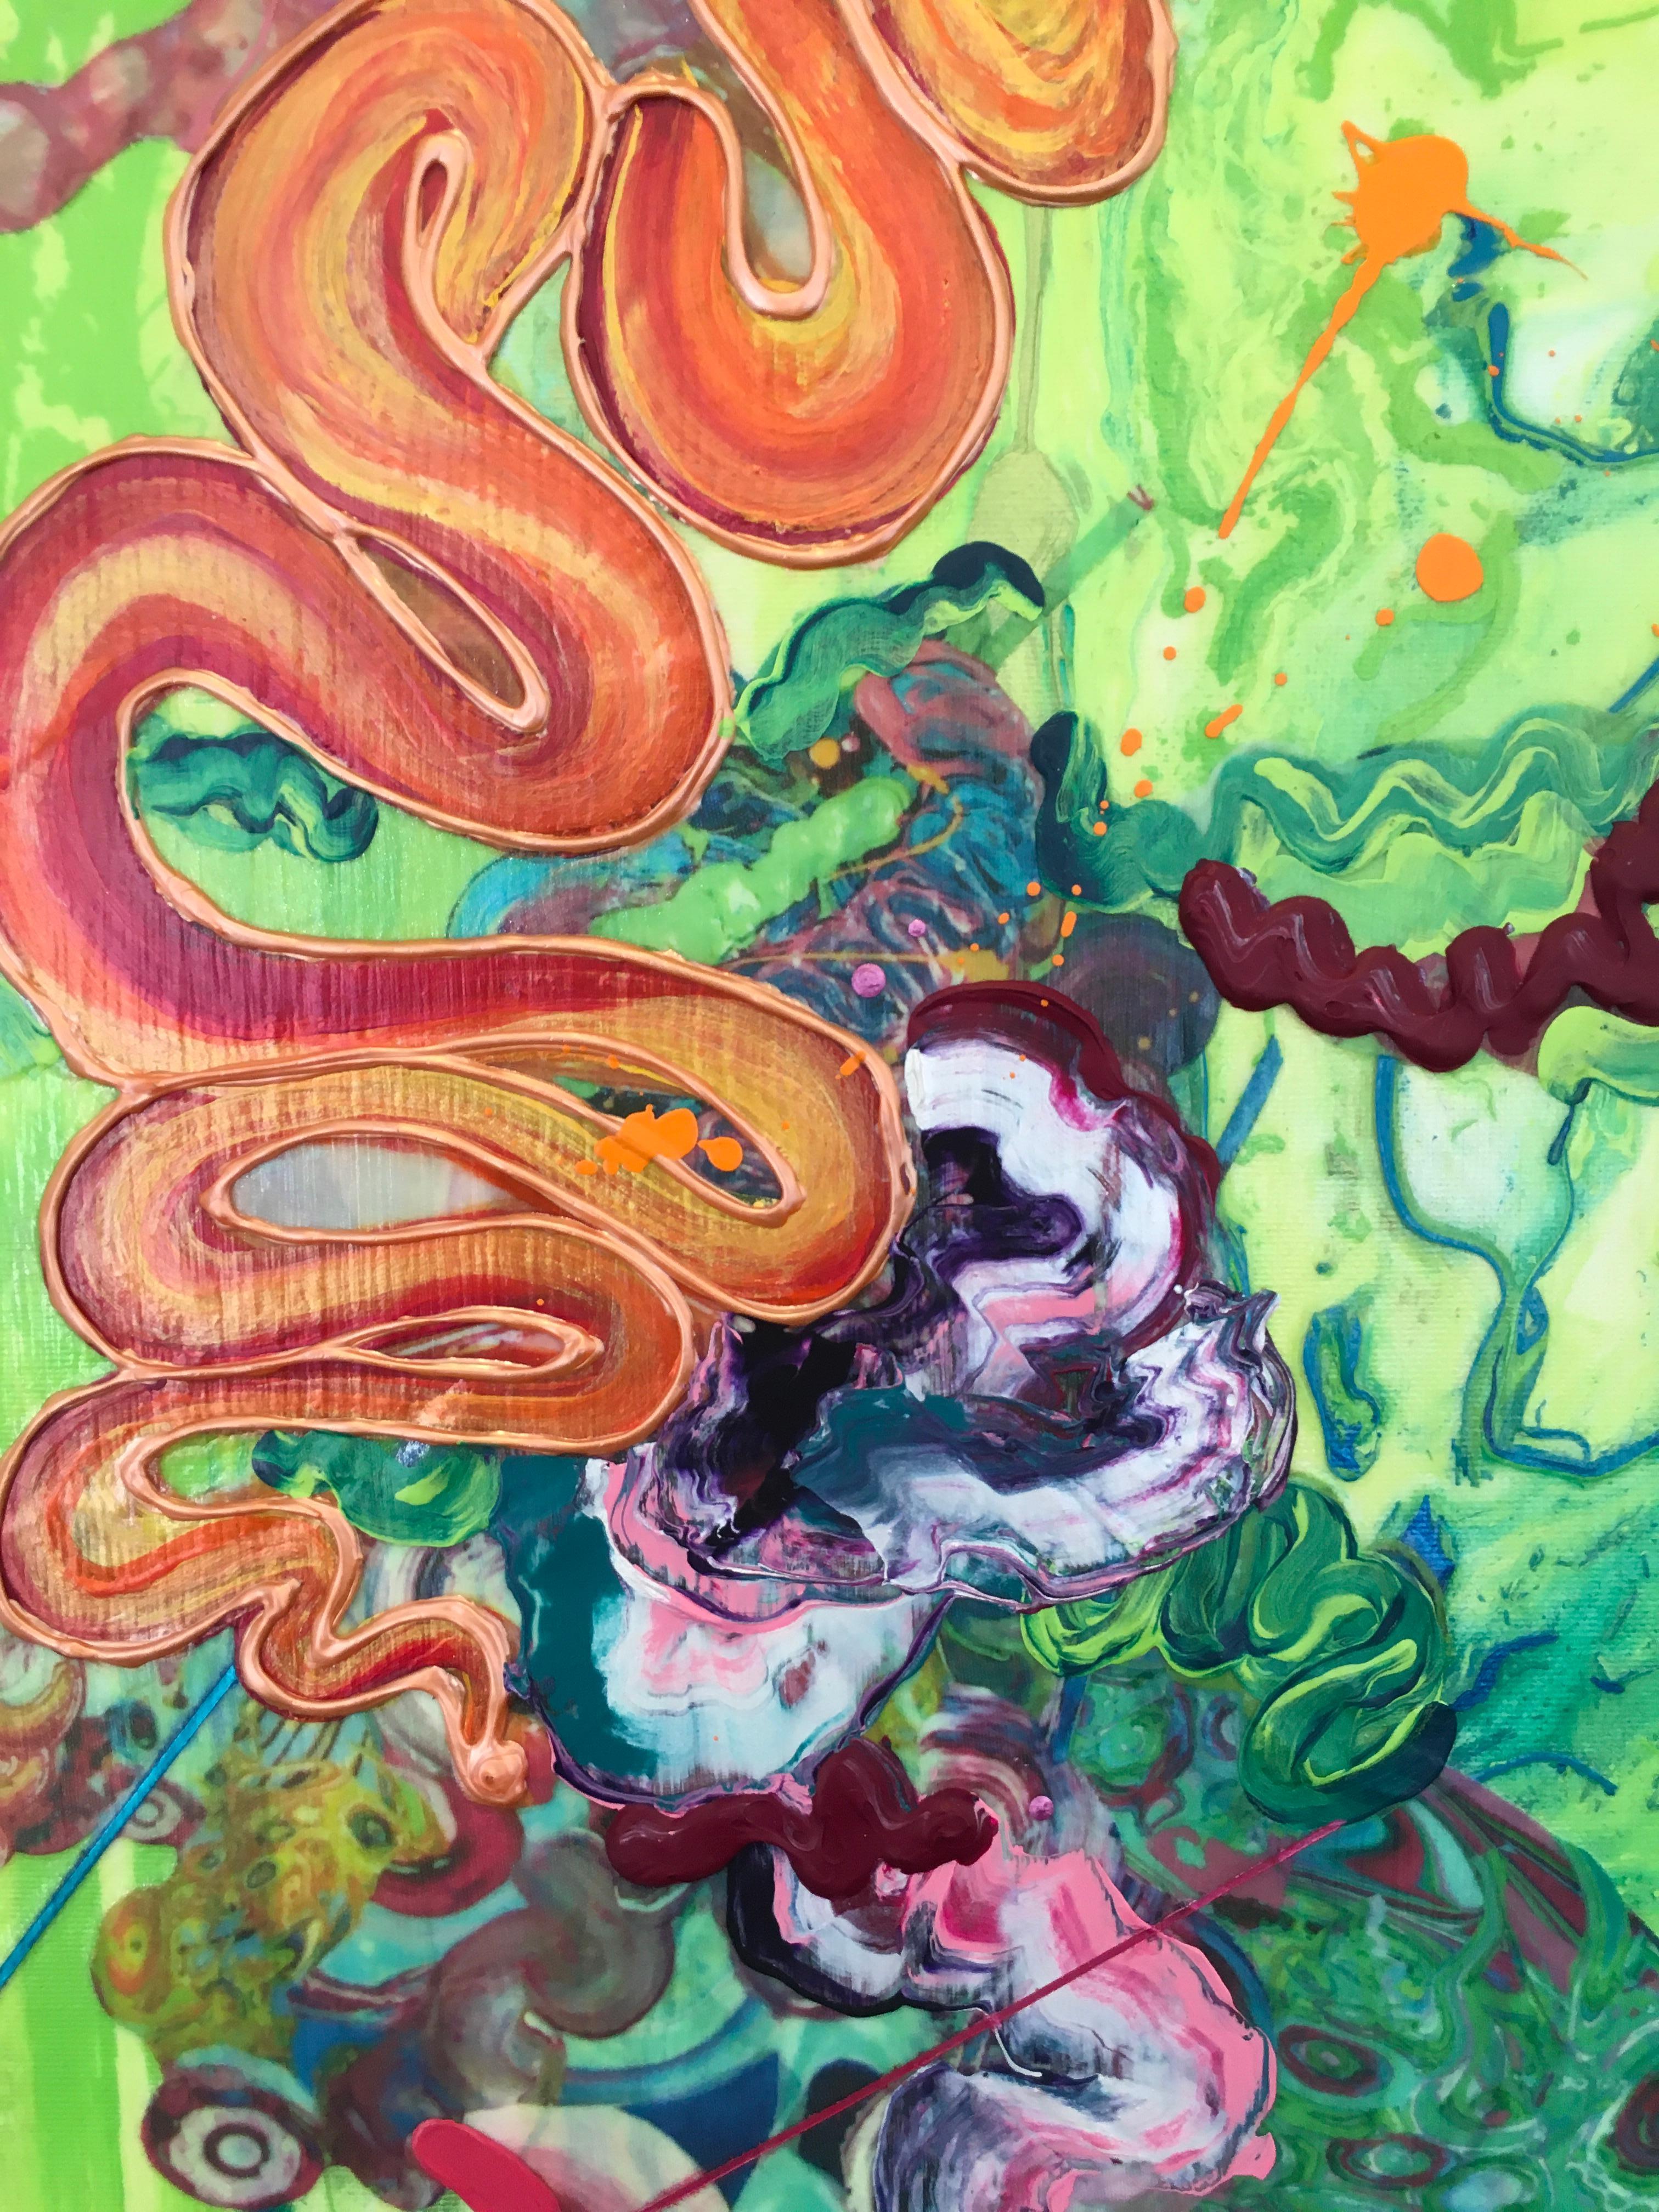 Kimber Berry, Liquid Landscape 0711,  Acrylic and Mixed Media on Canvas.  It is 18x12 inches.  This is a layered, dimensional contemporary painting.  It is filled with green, orange, and vibrant colors.  Berry is a California 